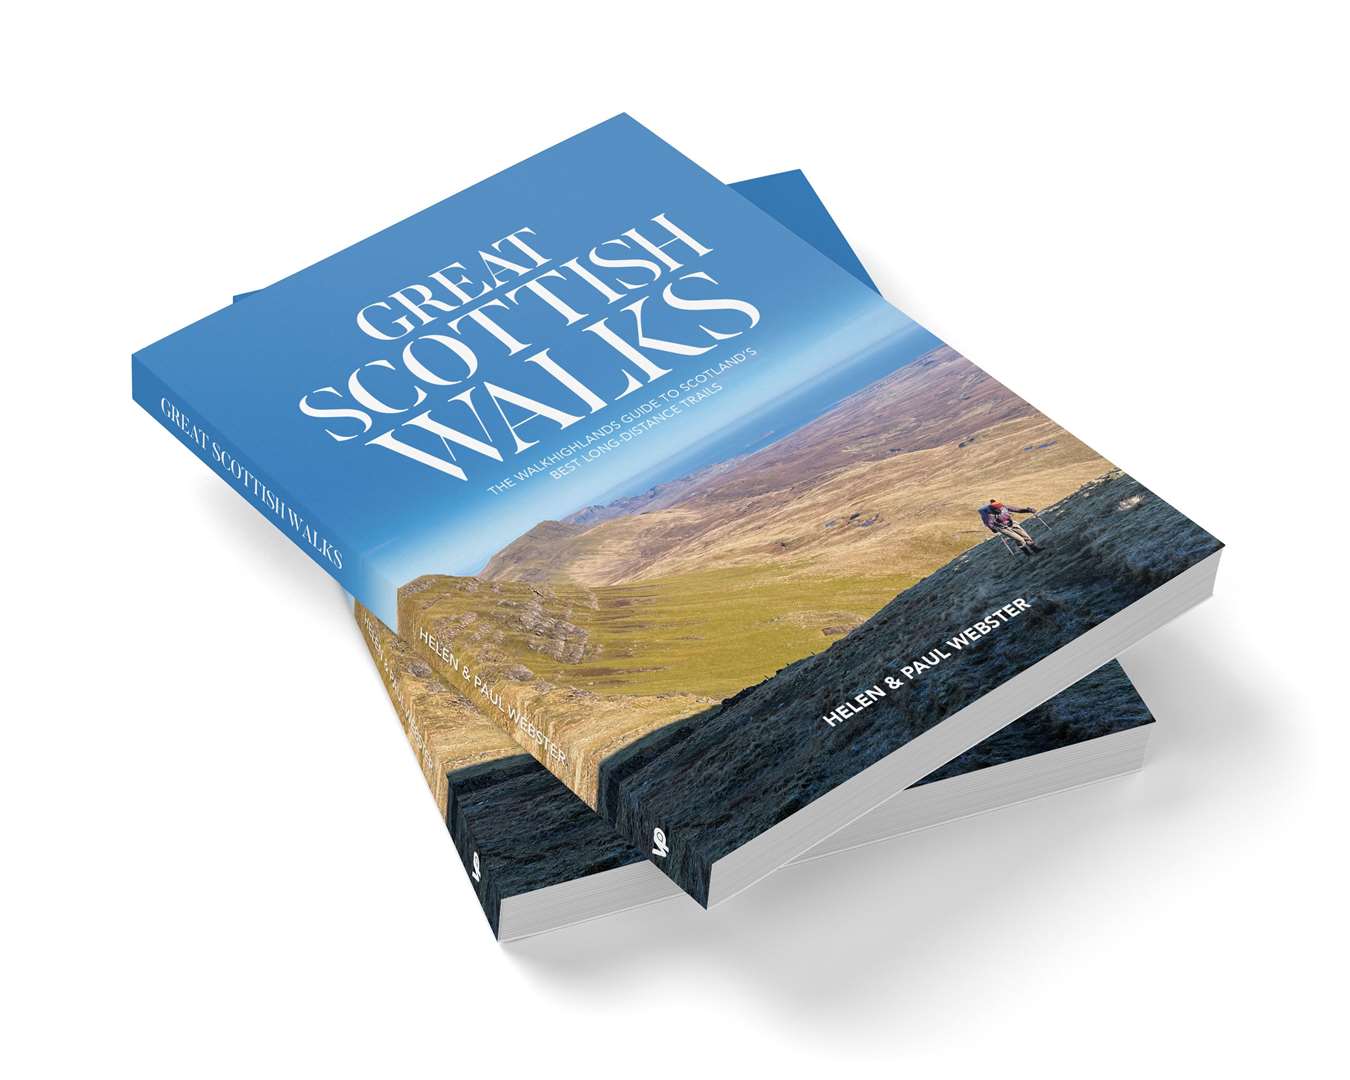 Great Scottish Walks by Helen and Paul Webster.